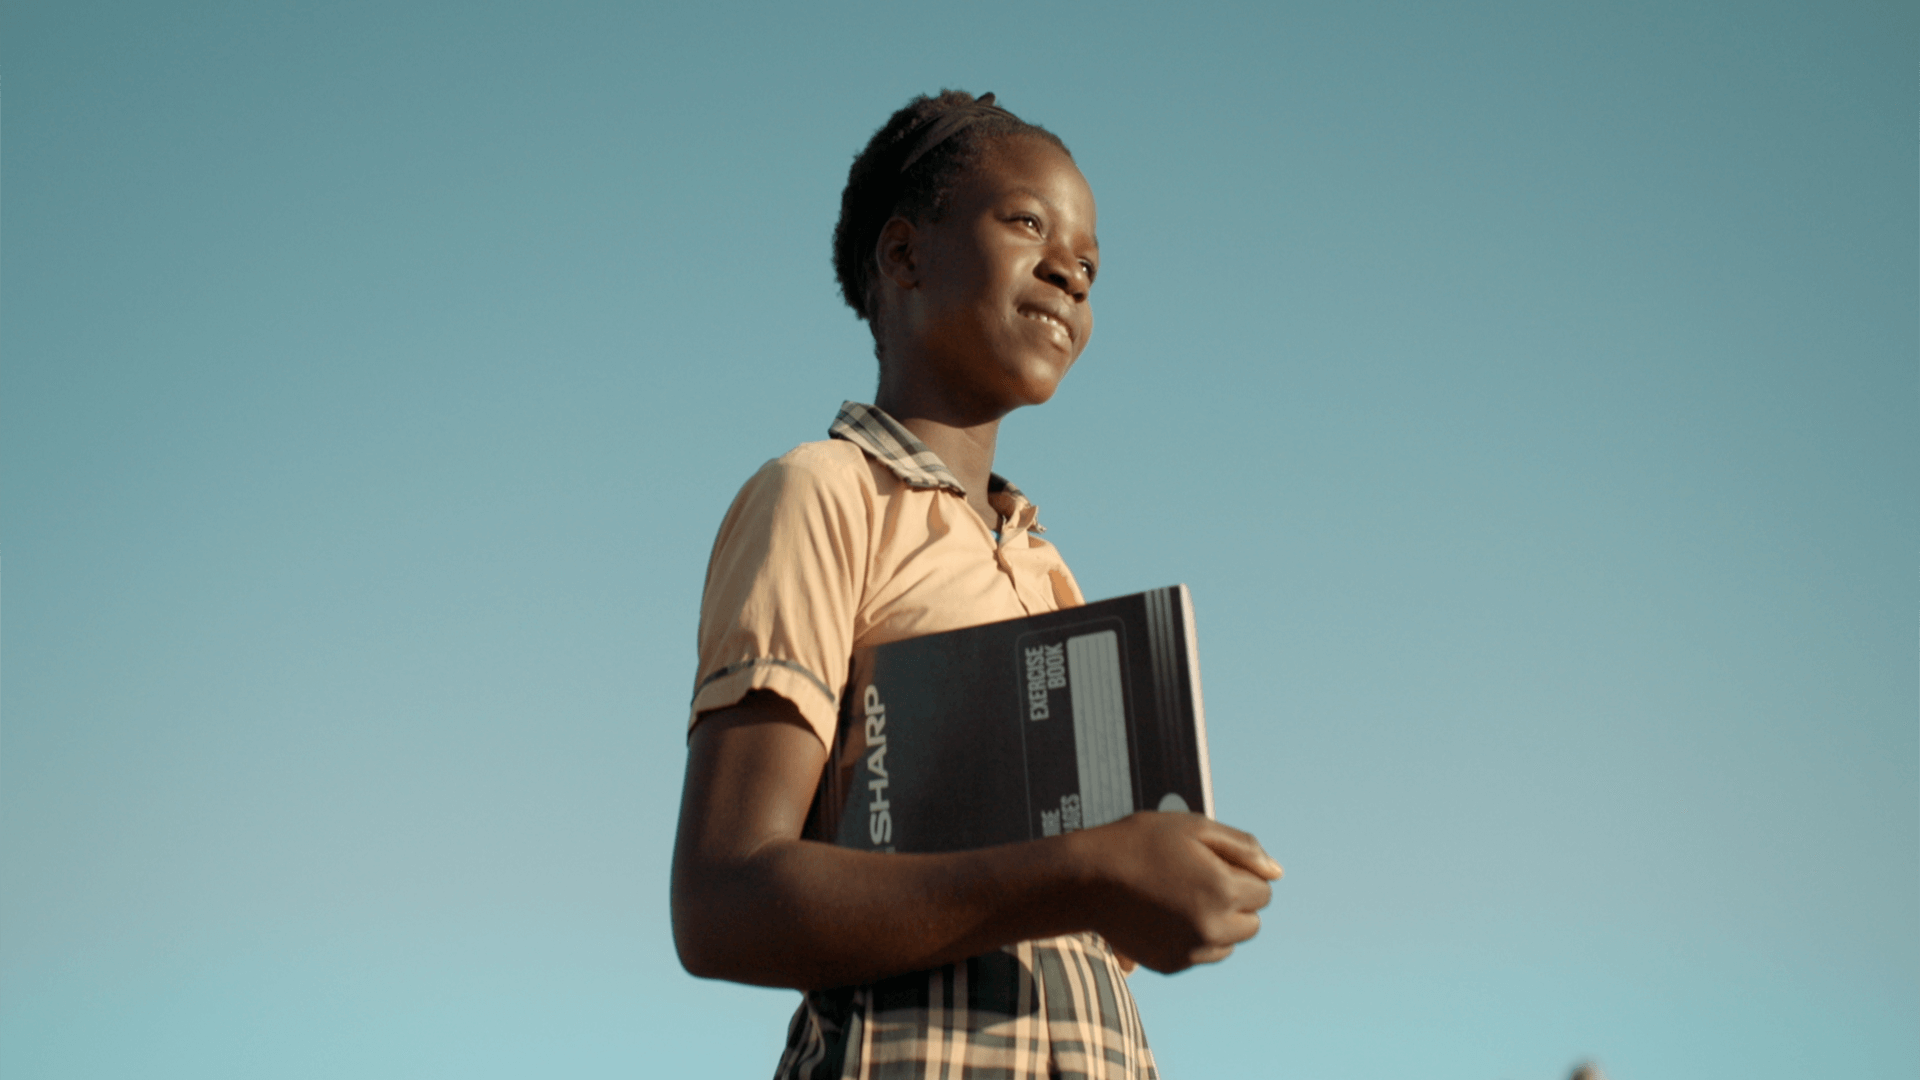 Still from the VANDAL produced World Vision commercial featuring a young woman with a book